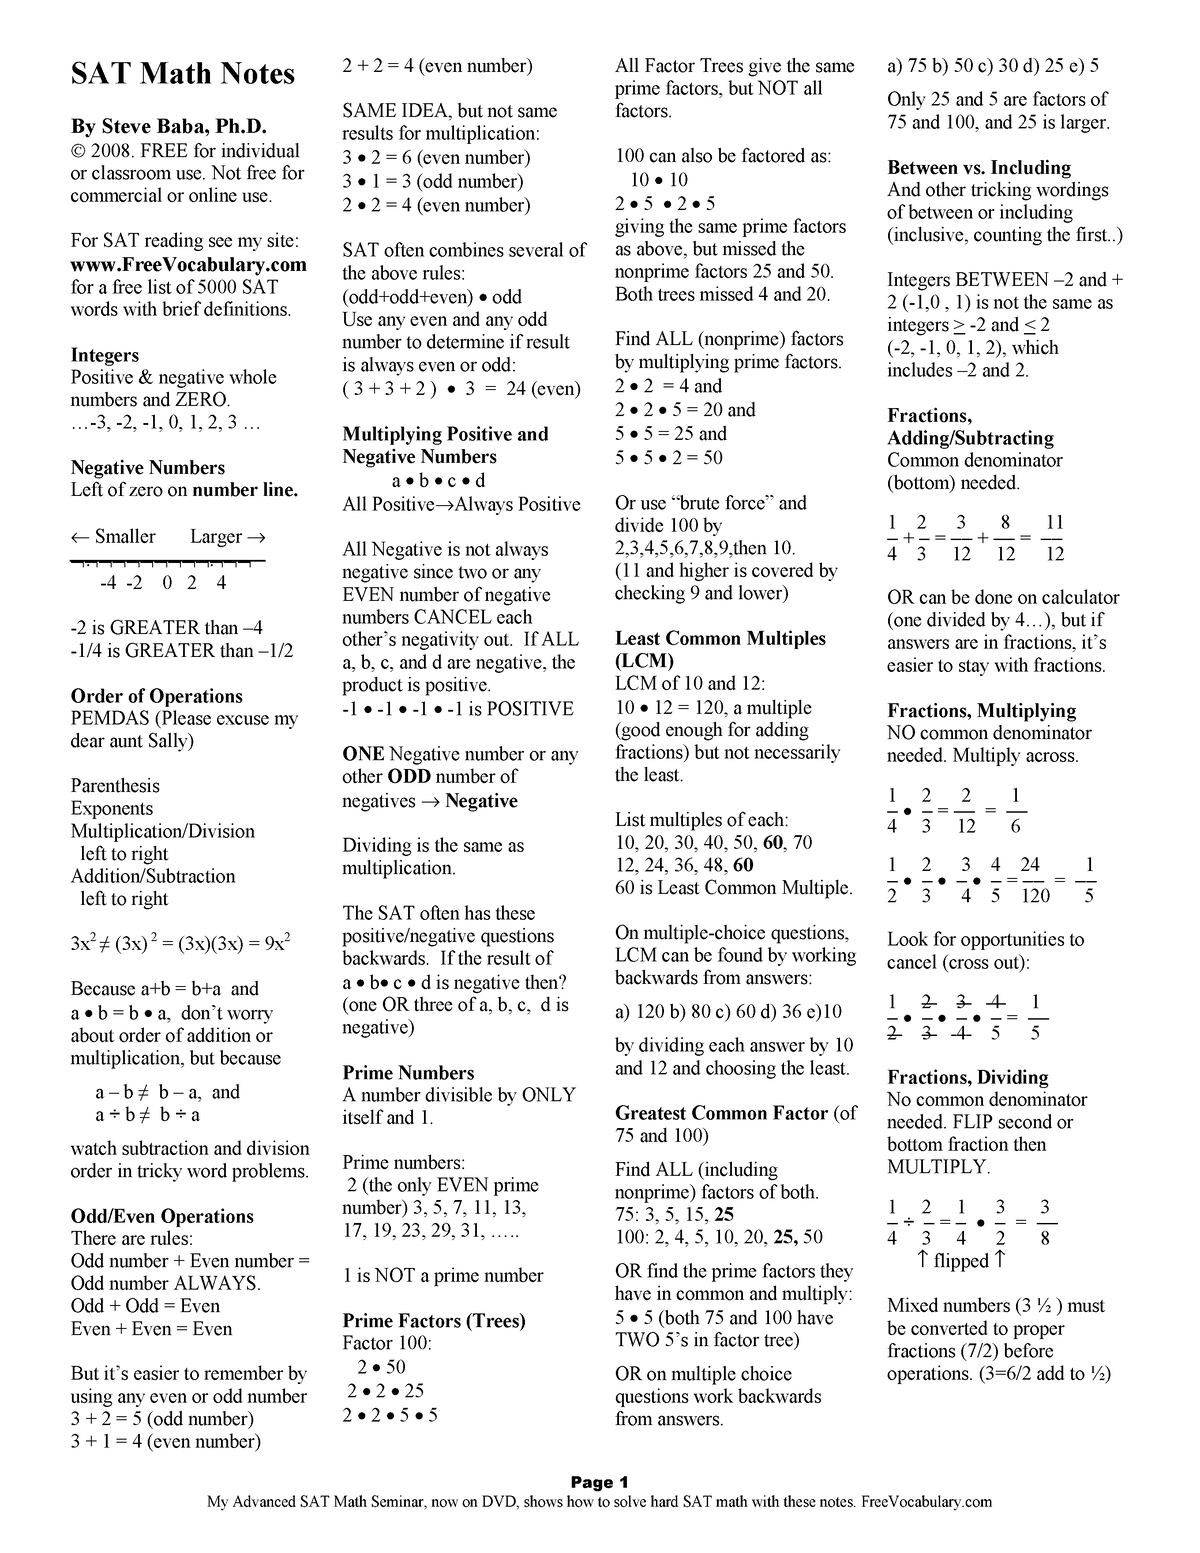 sat-math-notes-helpful-page-1-sat-math-notes-by-steve-baba-ph-2008